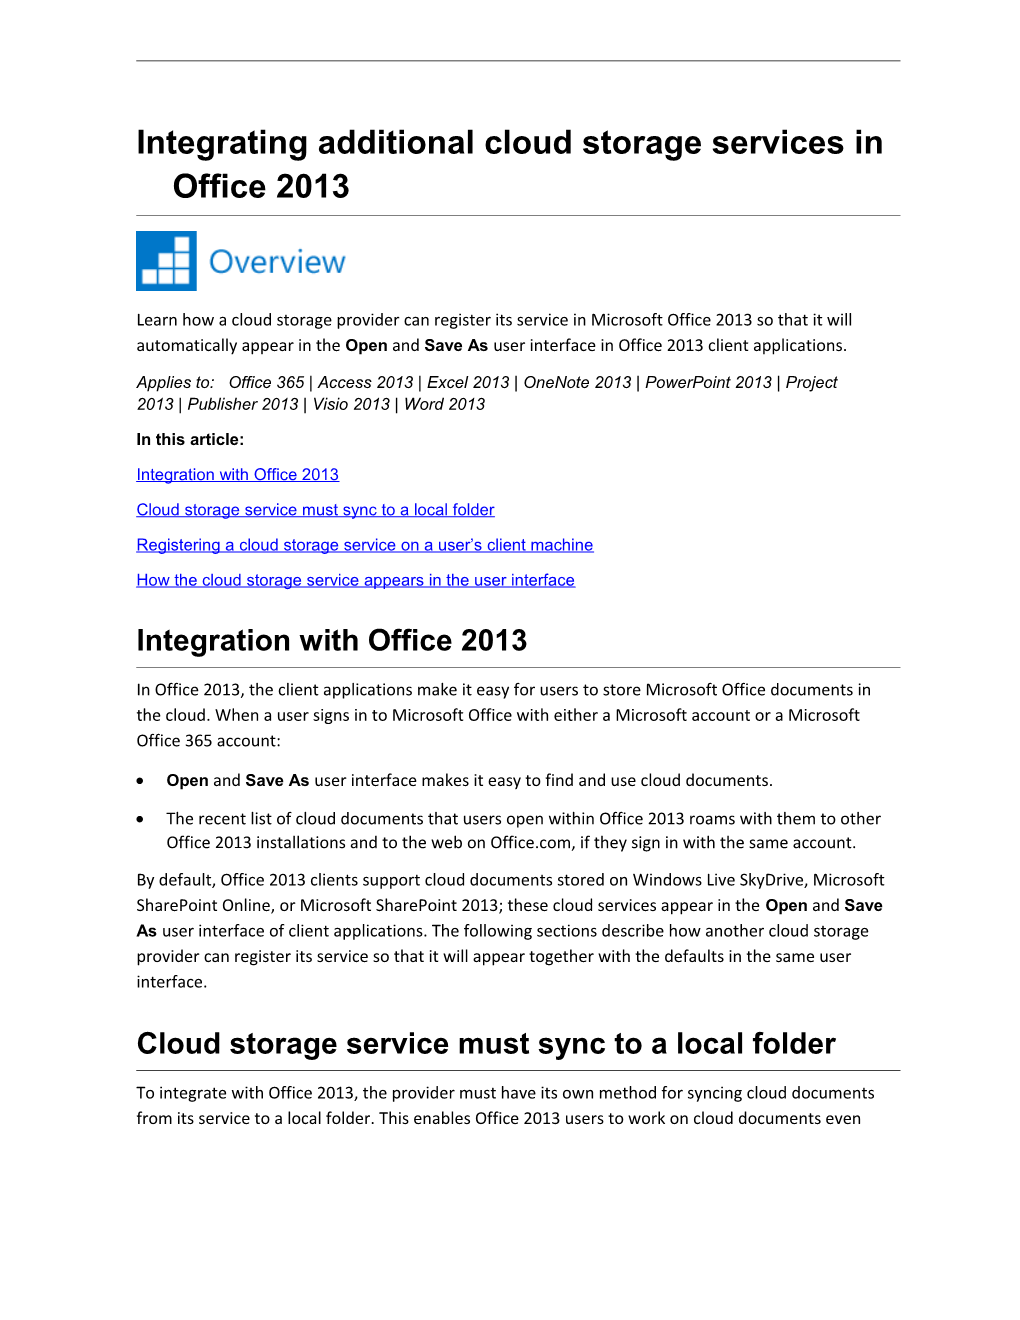 Integrating Additional Cloud Storage Services in Office 2013